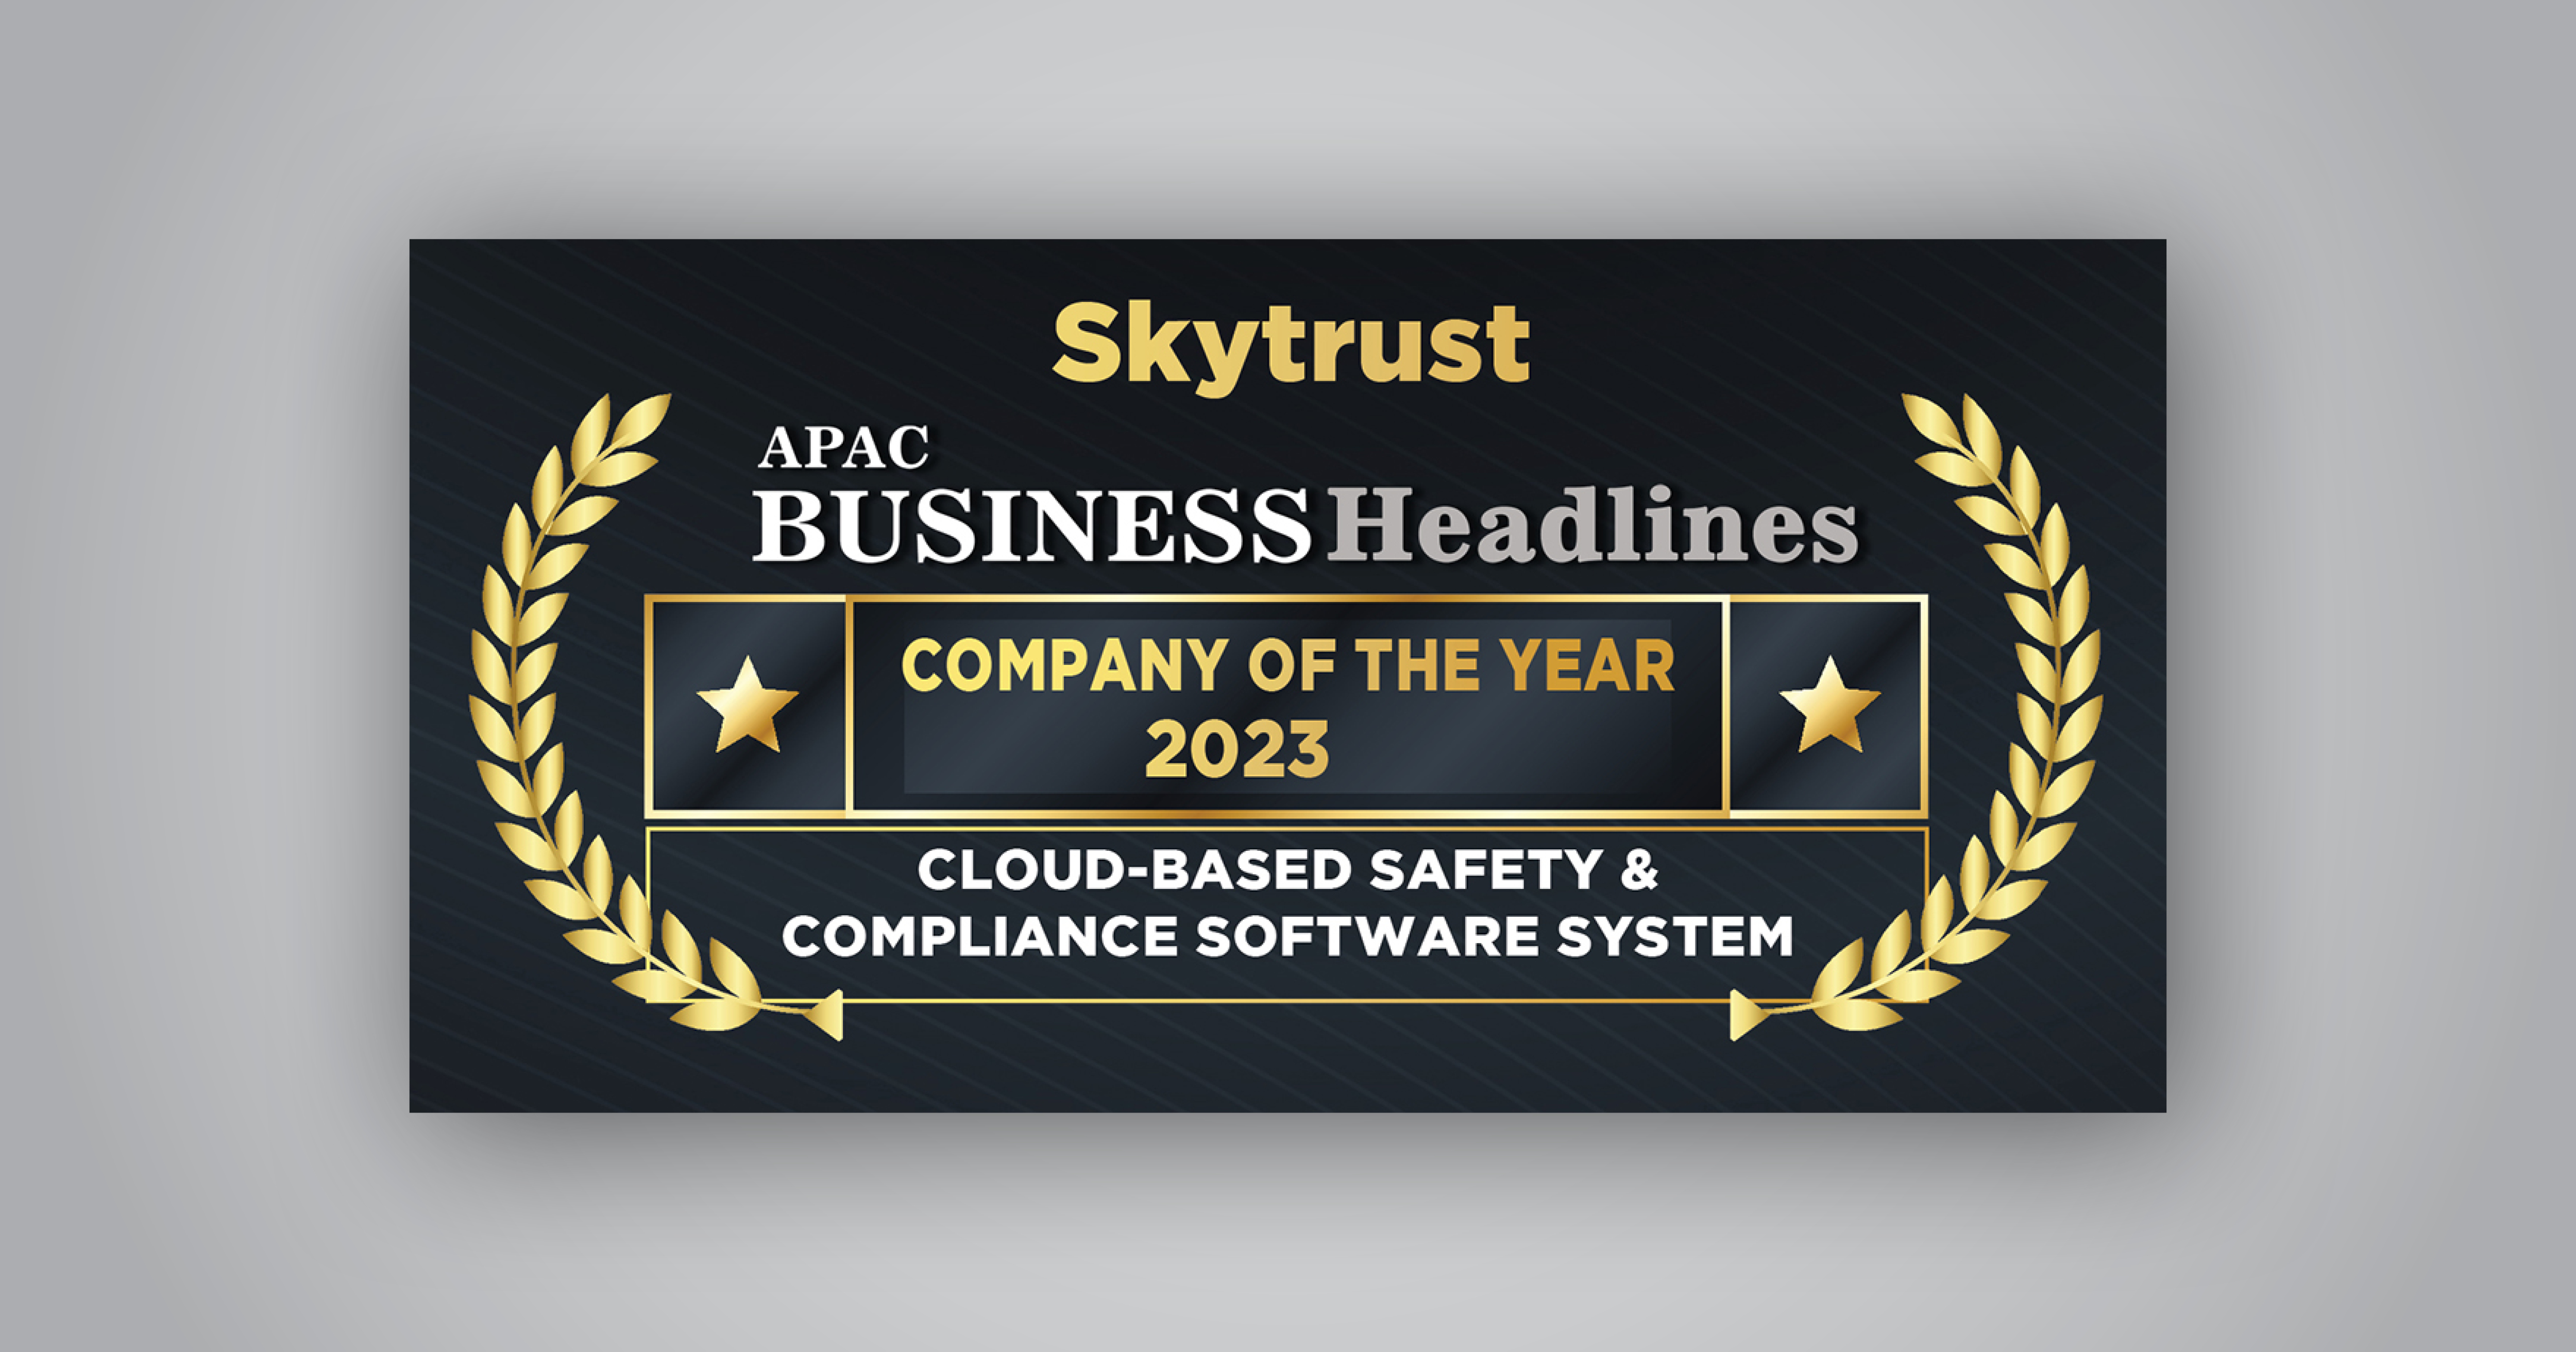 SKYTRUST IN THE MEDIA - APAC ARTICLE 'Skytrust: Helping Companies to Ensure Safety and Compliance in the Workplace'